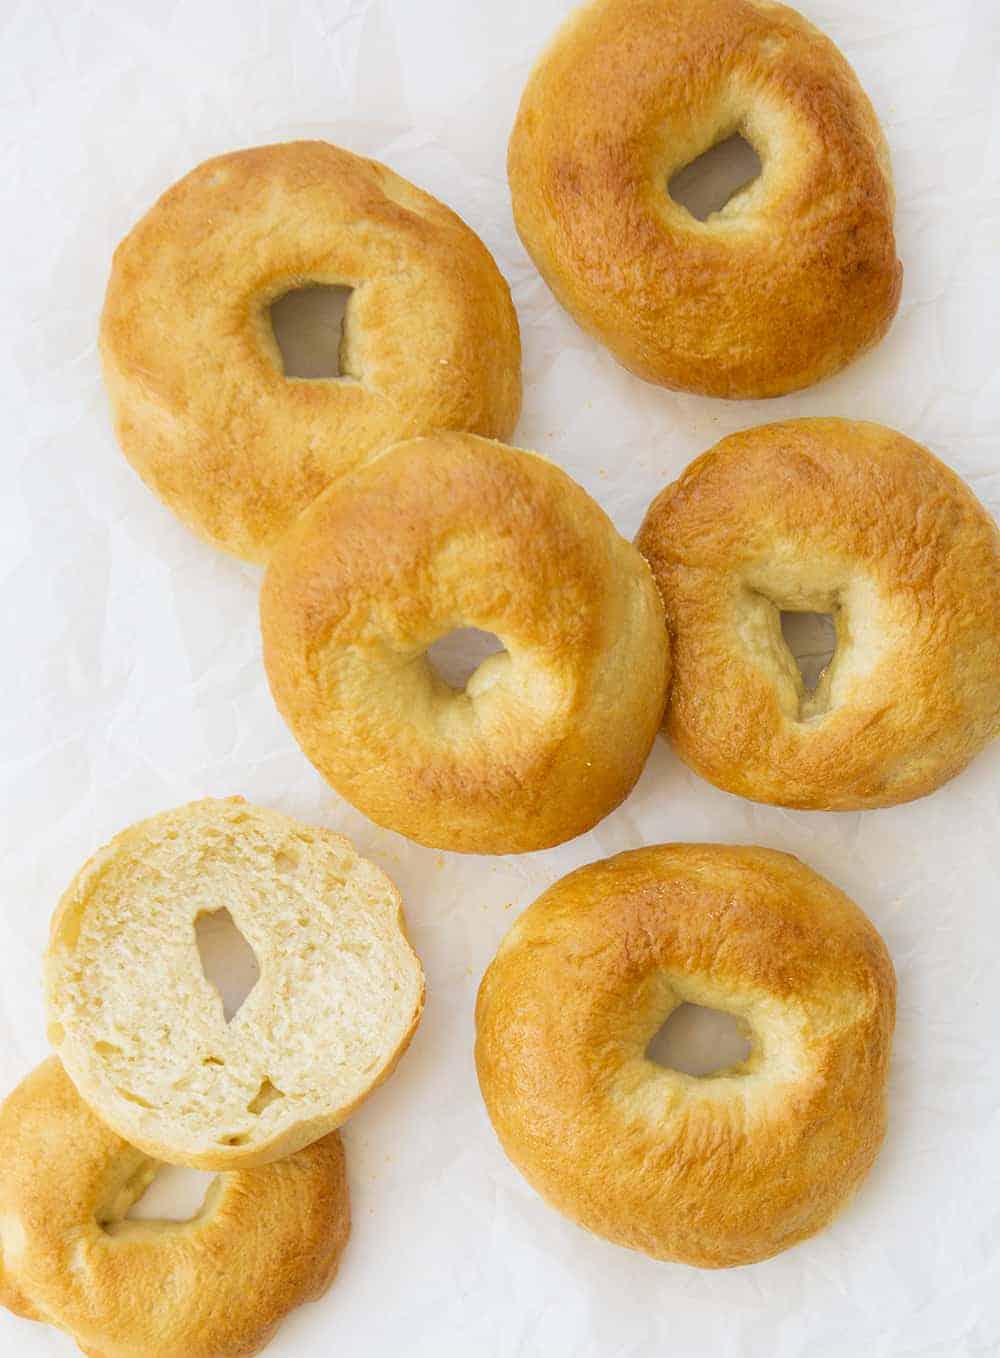 Overhead Image of Plain Bagels on Parchment Paper with one Cut in Half to See Inside